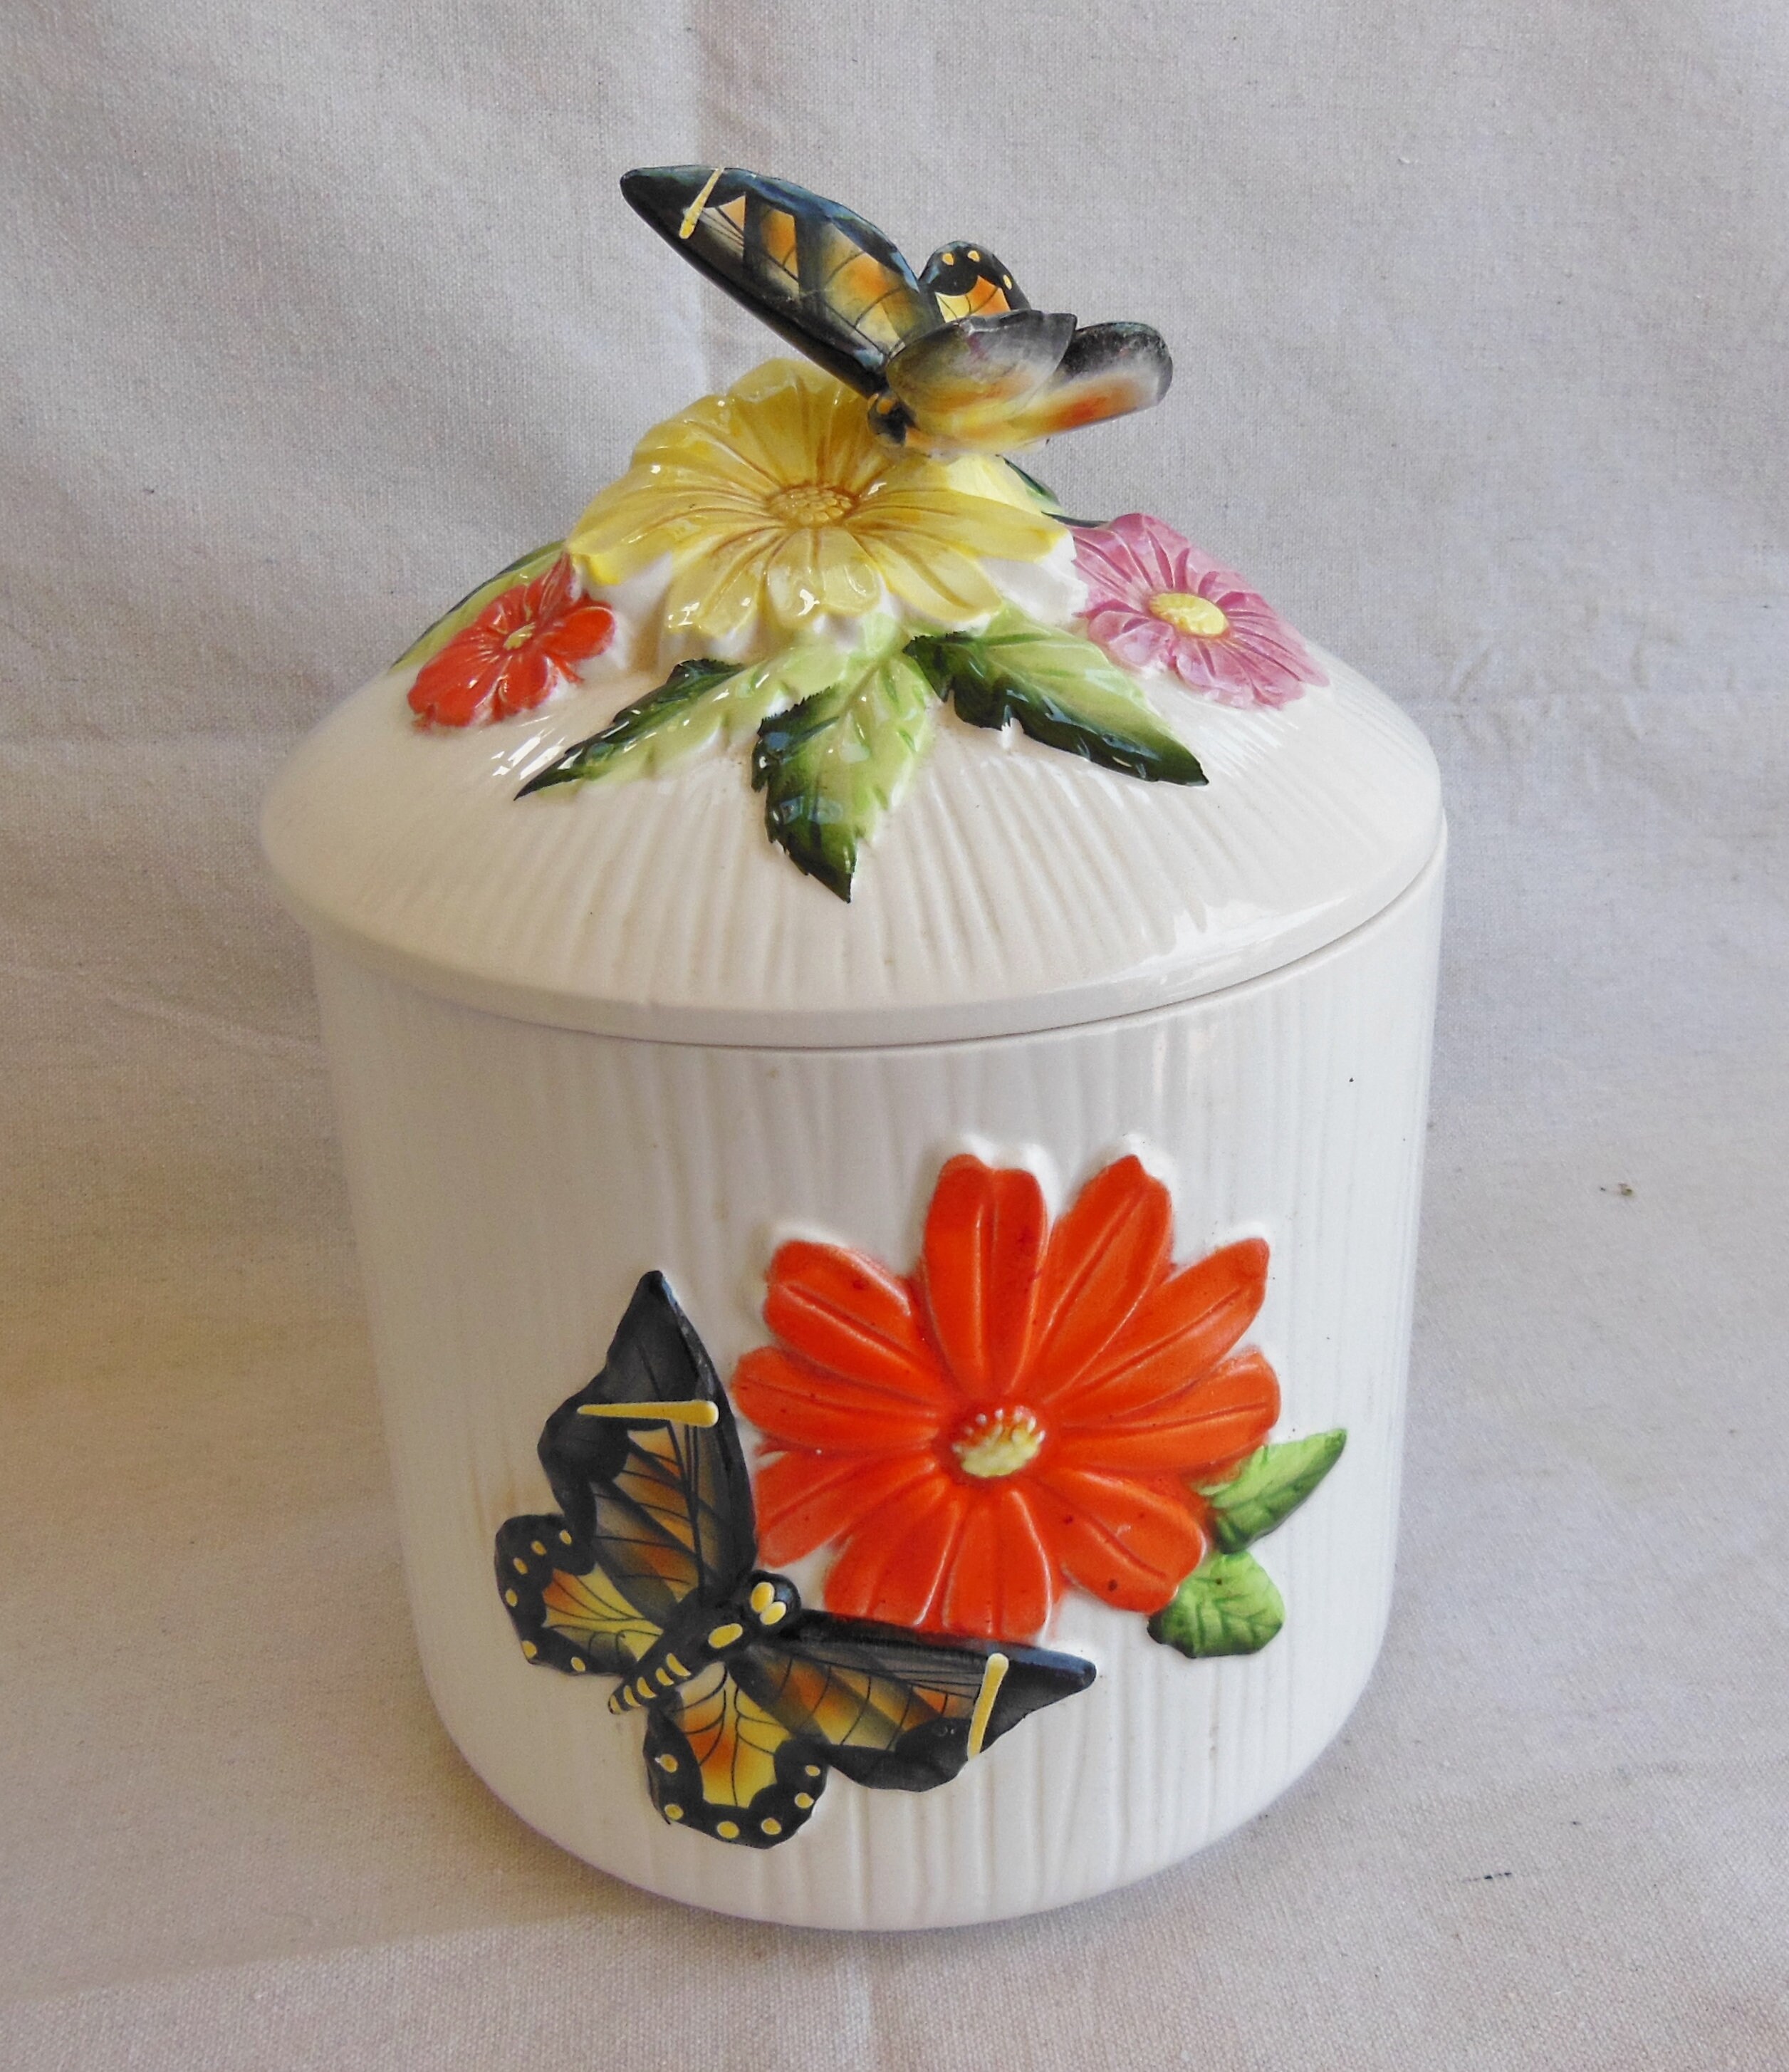 Lonovel Vintage Ceramic Cookies Jars,Retro Bird and Flower Design,Large  Kitchen Organization Storage Canister with Airtight Lid,Seal Canister for  Food